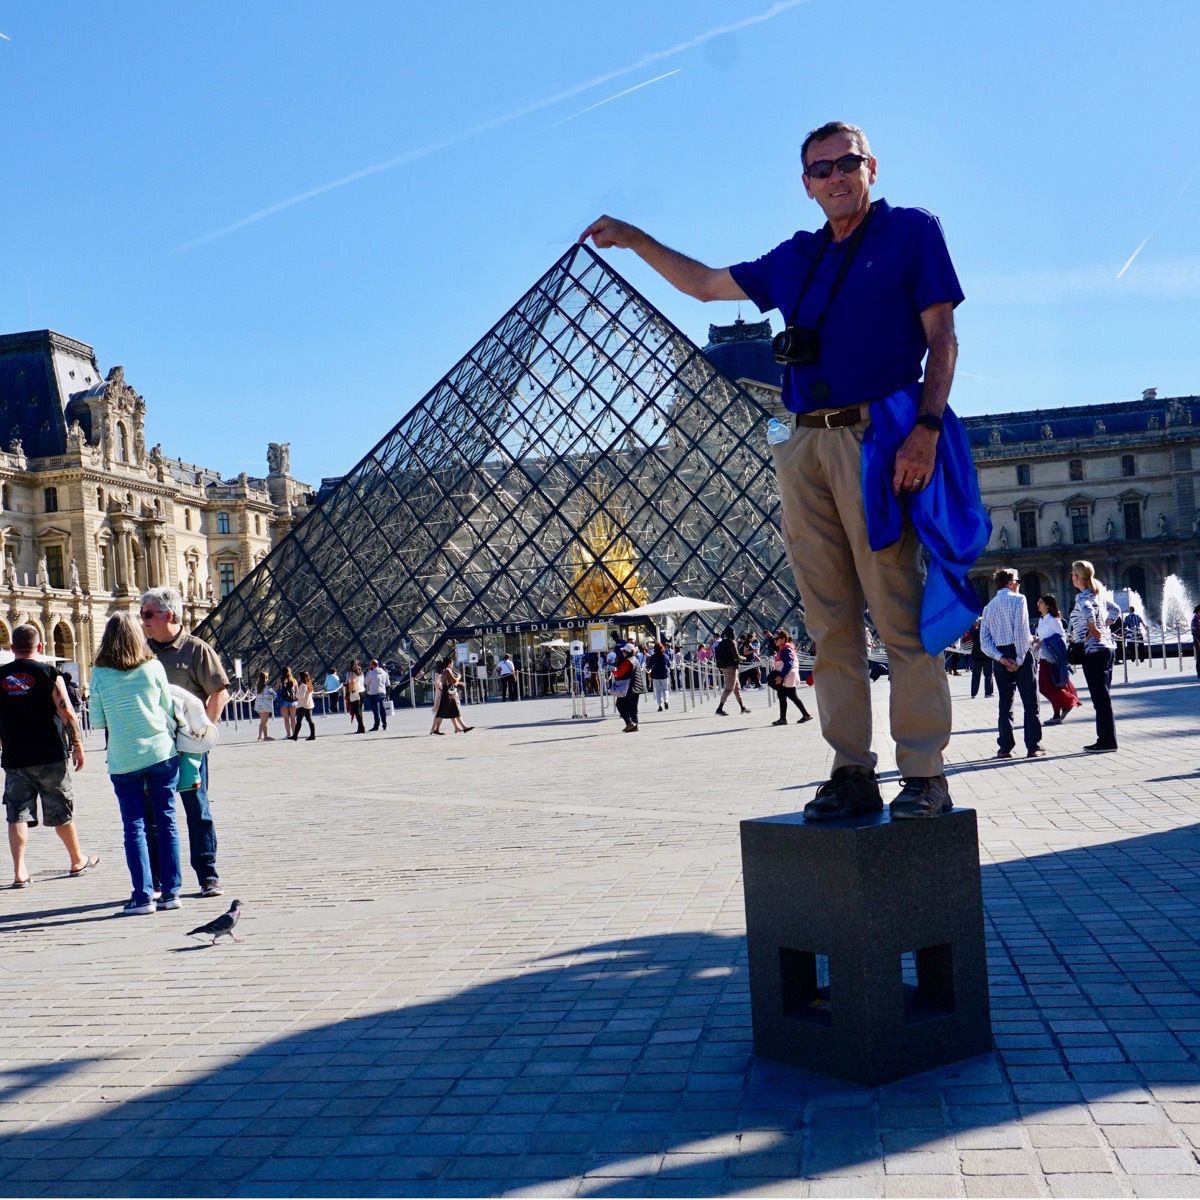 Tom at the Louvre